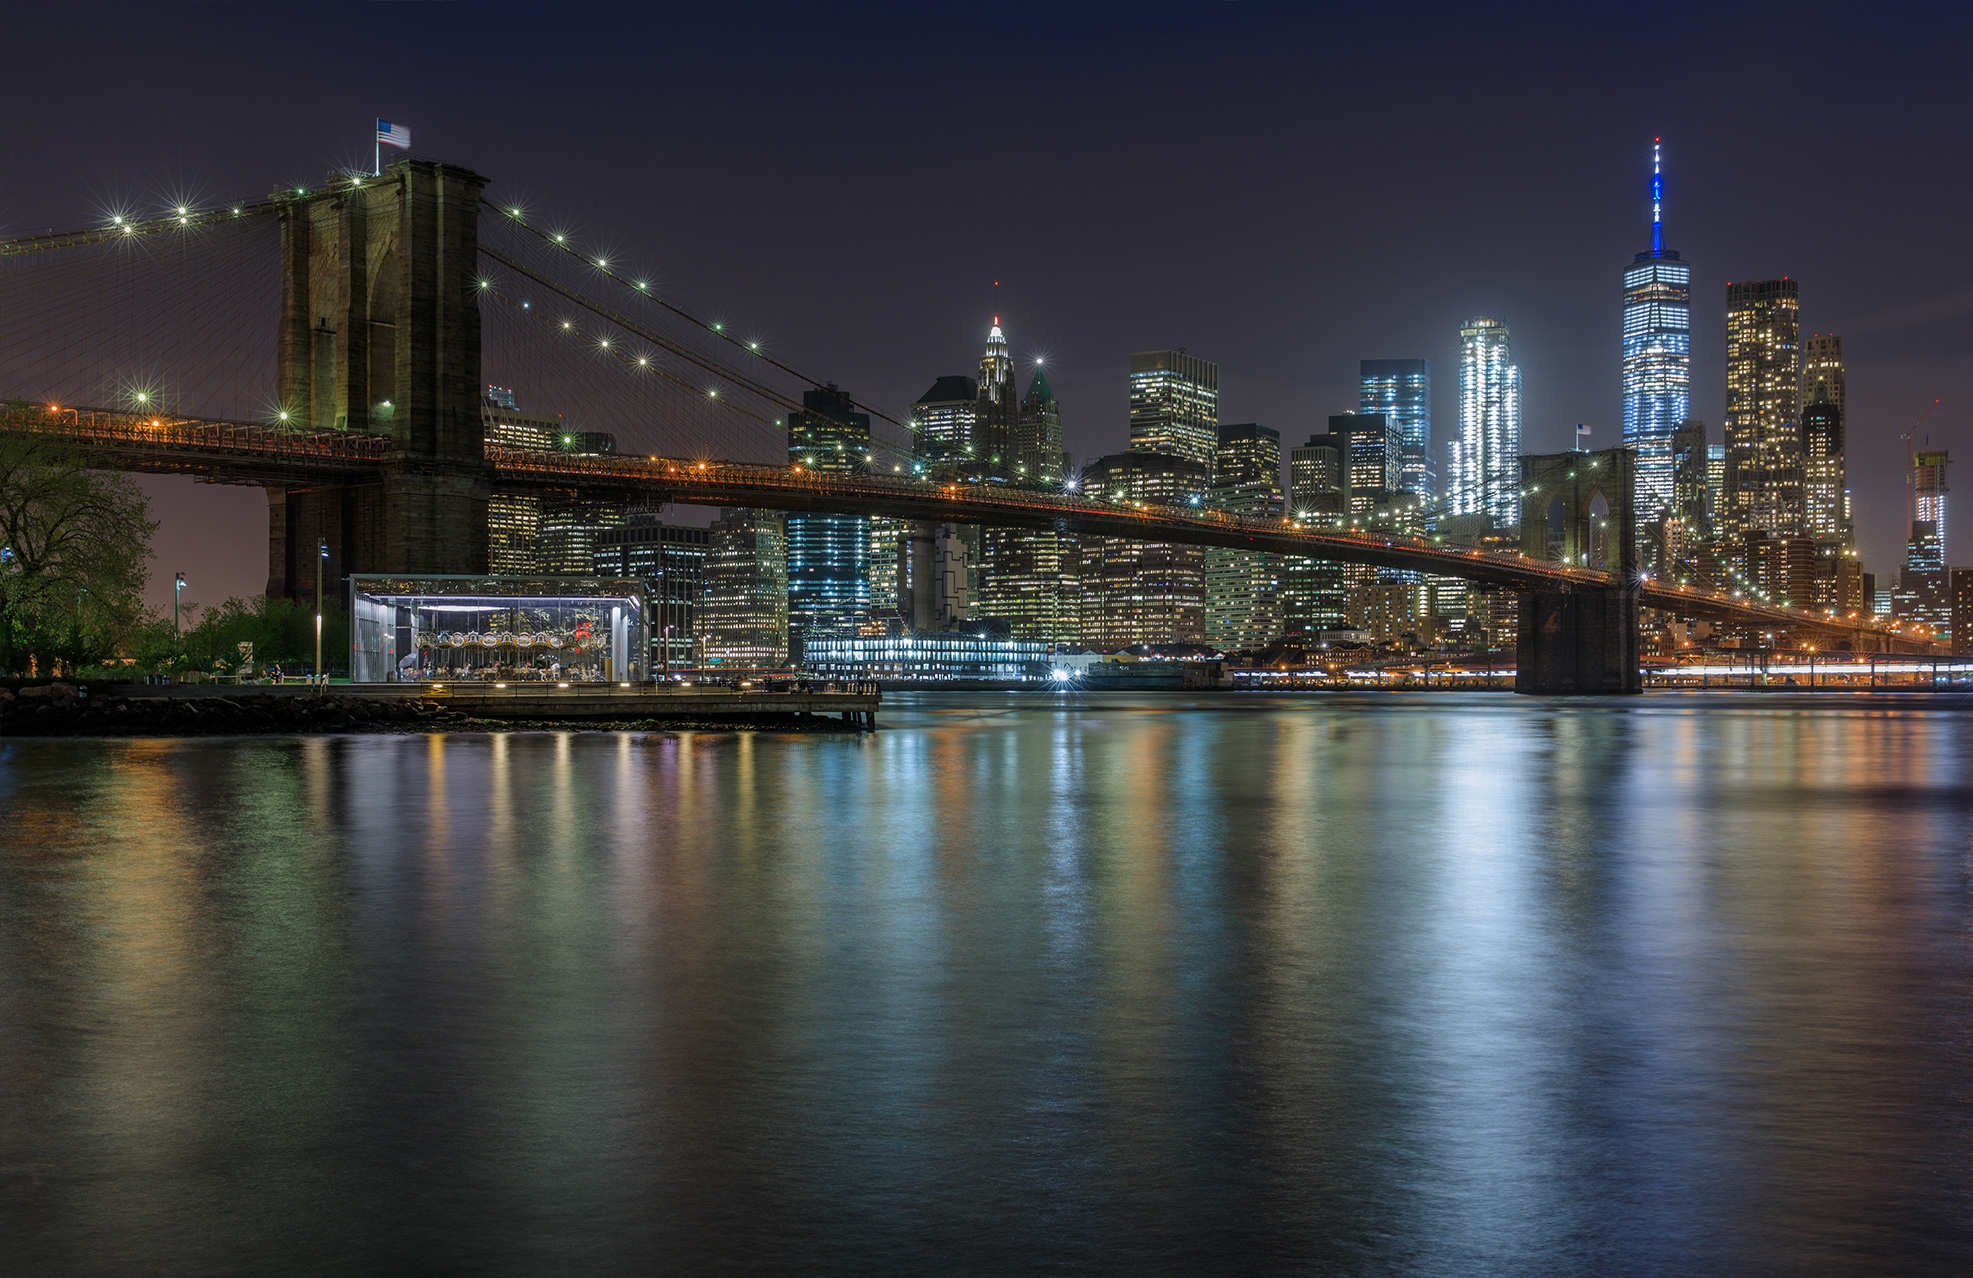 City skyline at night with buildings lit up and a bridge in the foreground.